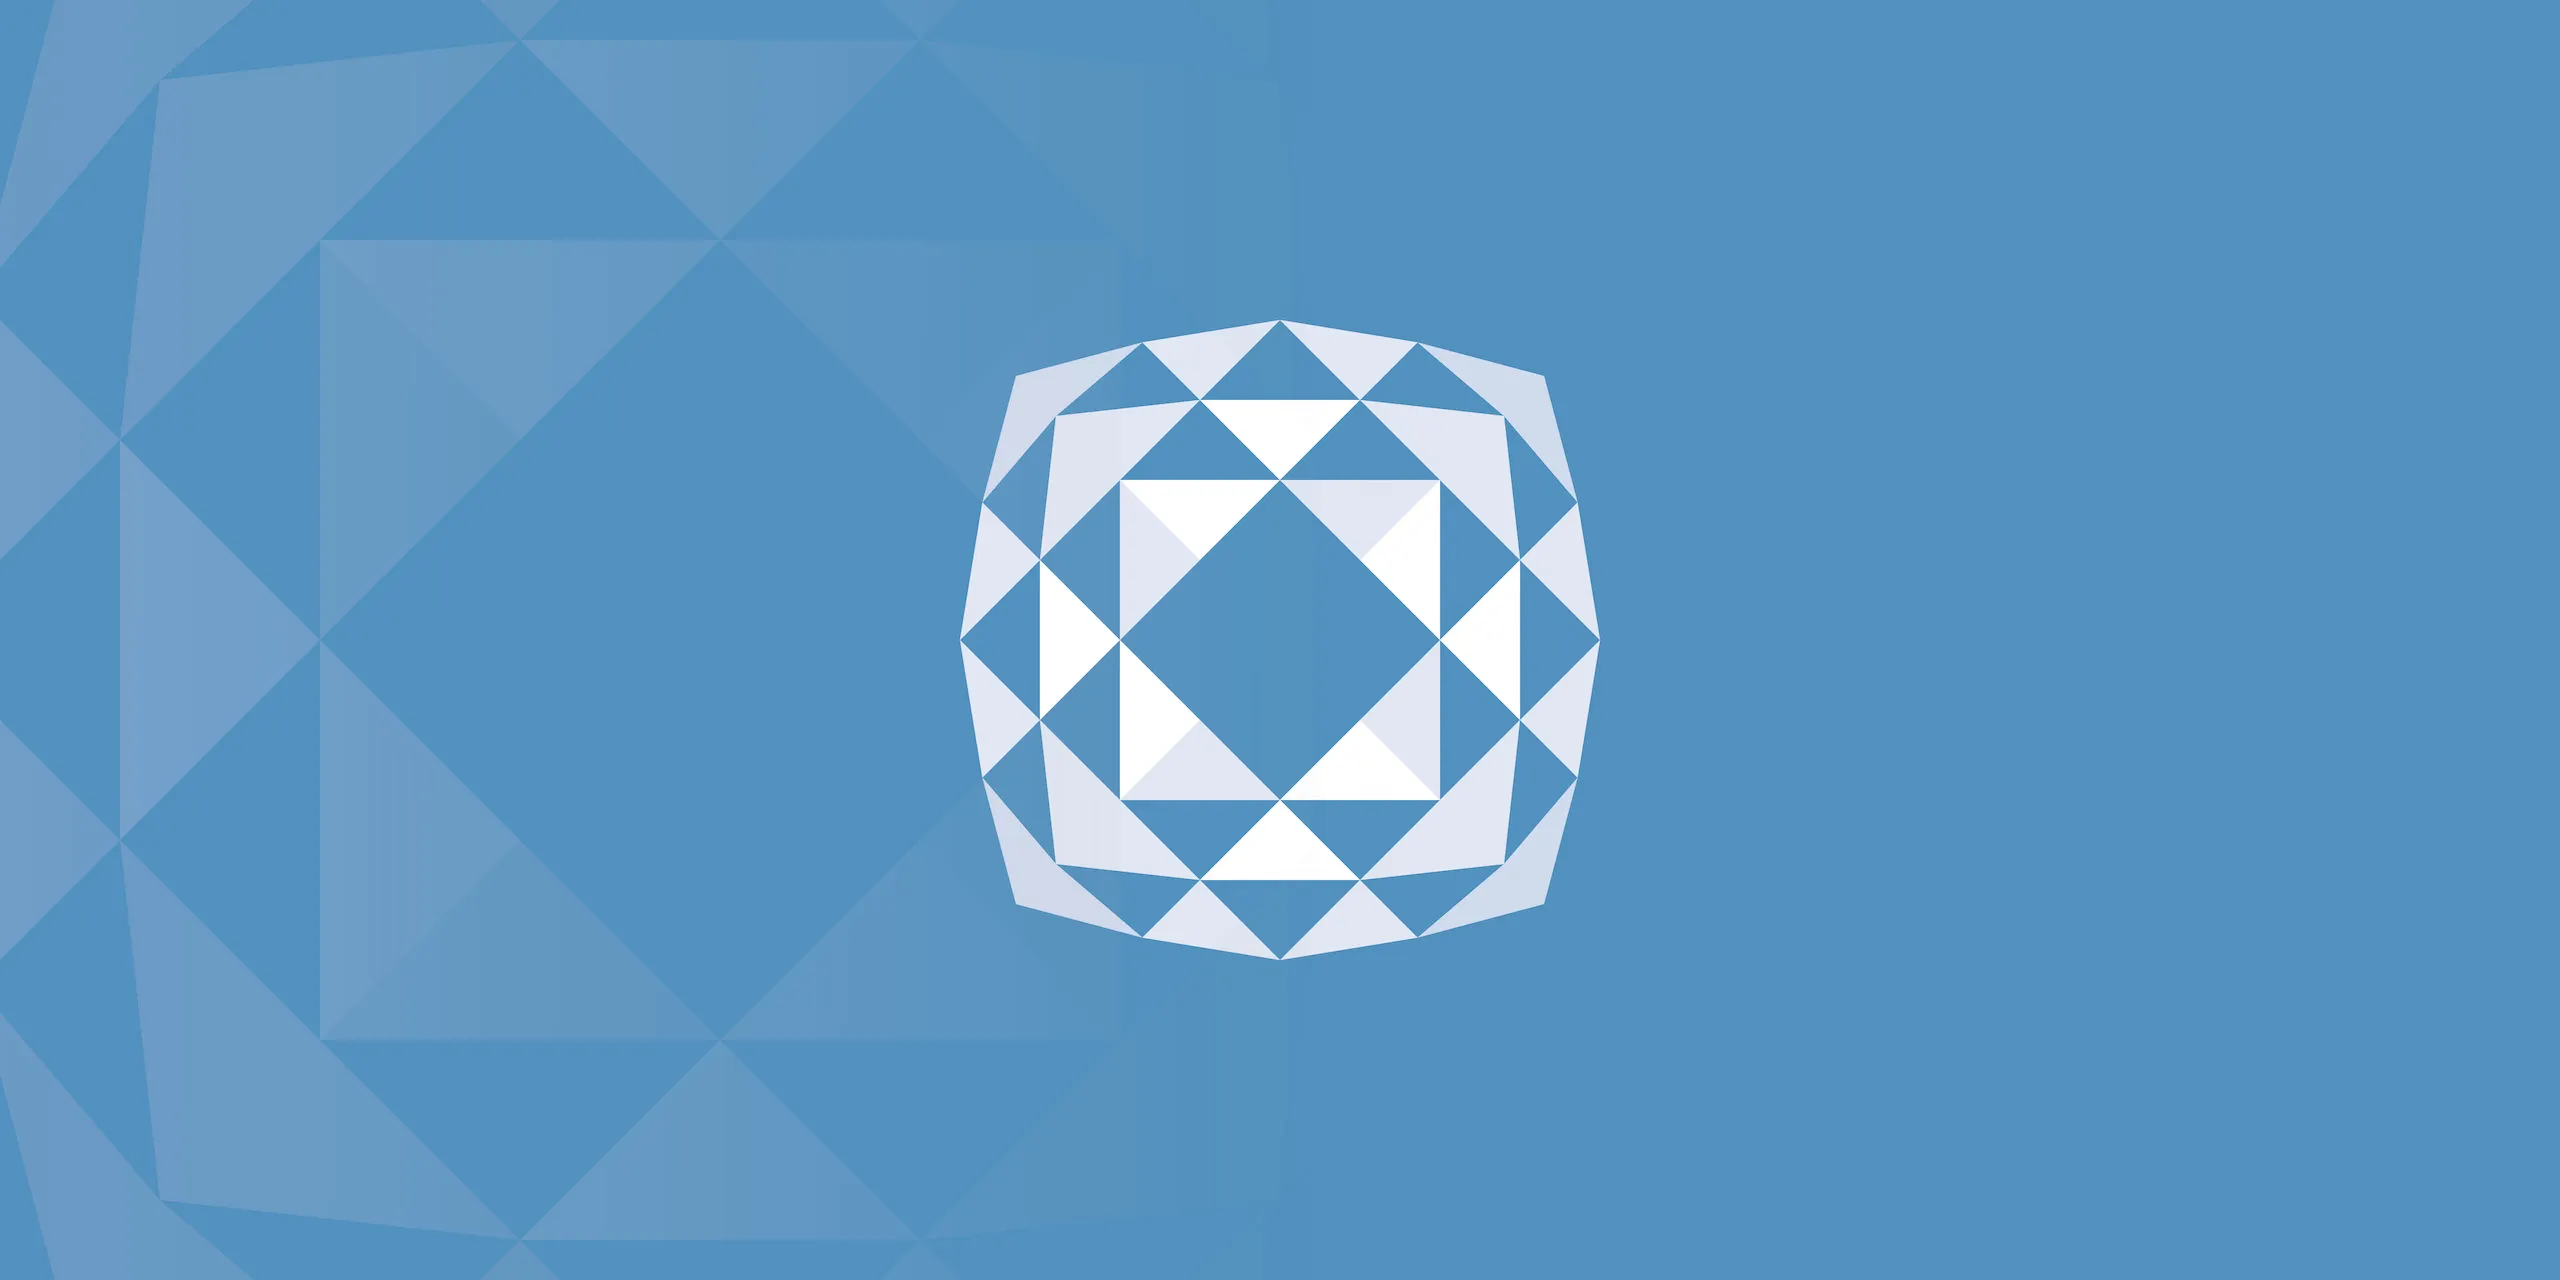 Trove logo consisting of three tiers of triangles arranged in a shape reminiscent of a cushion cut diamond, placed around a central vertically aligned diamond-shaped white space, in white on a mid-blue field